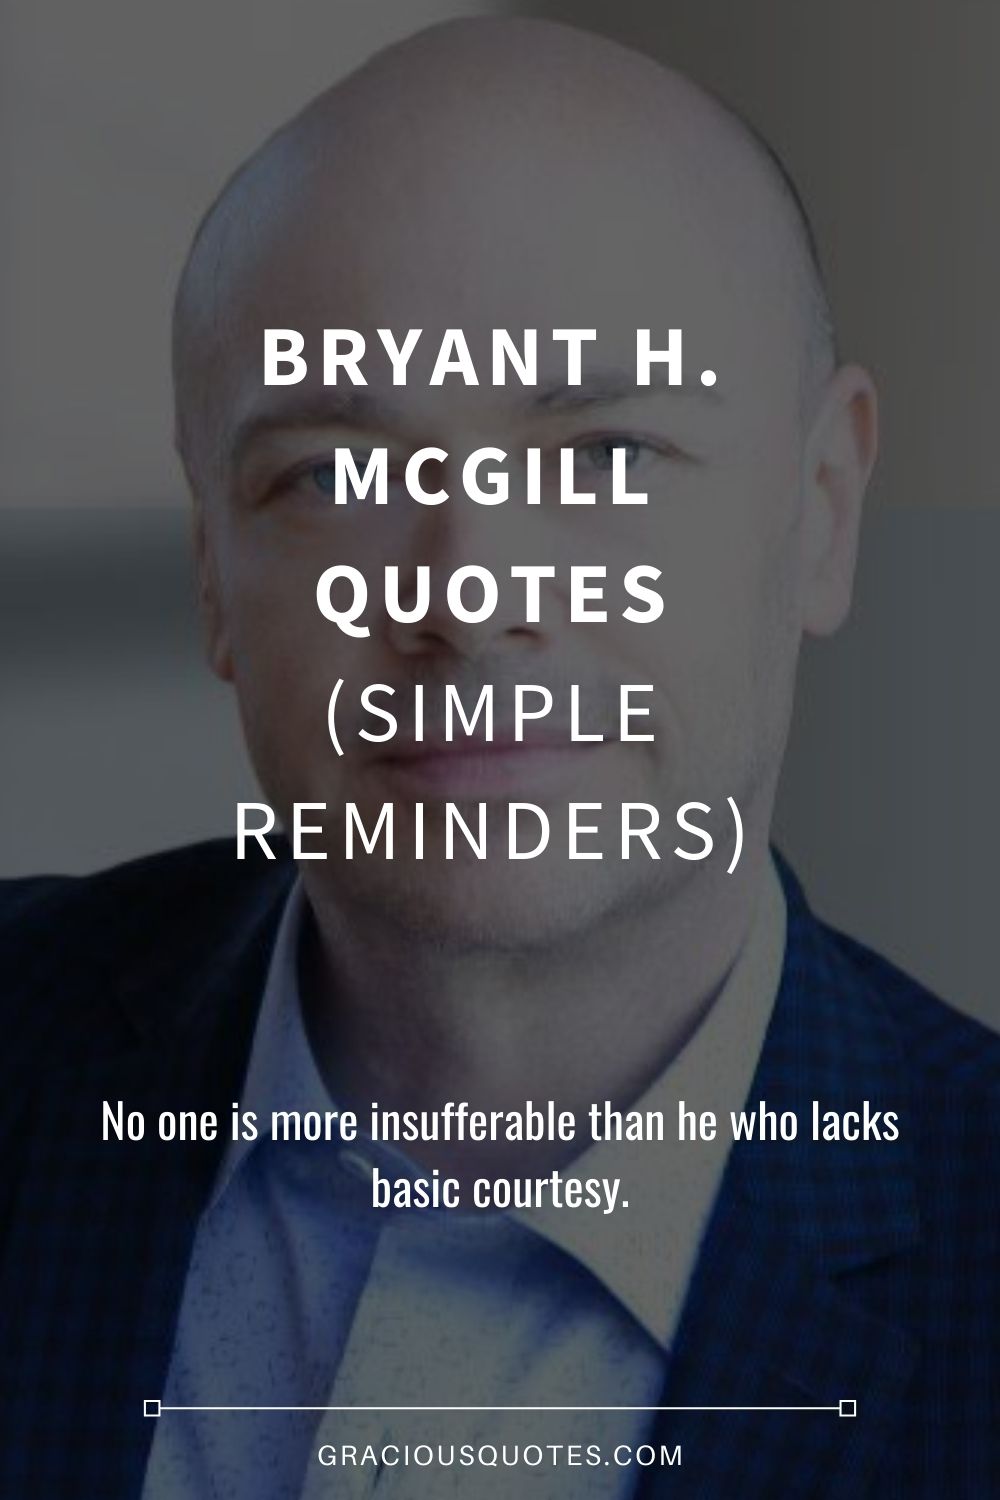 Bryant H. McGill Quotes (SIMPLE REMINDERS) - Gracious Quotes